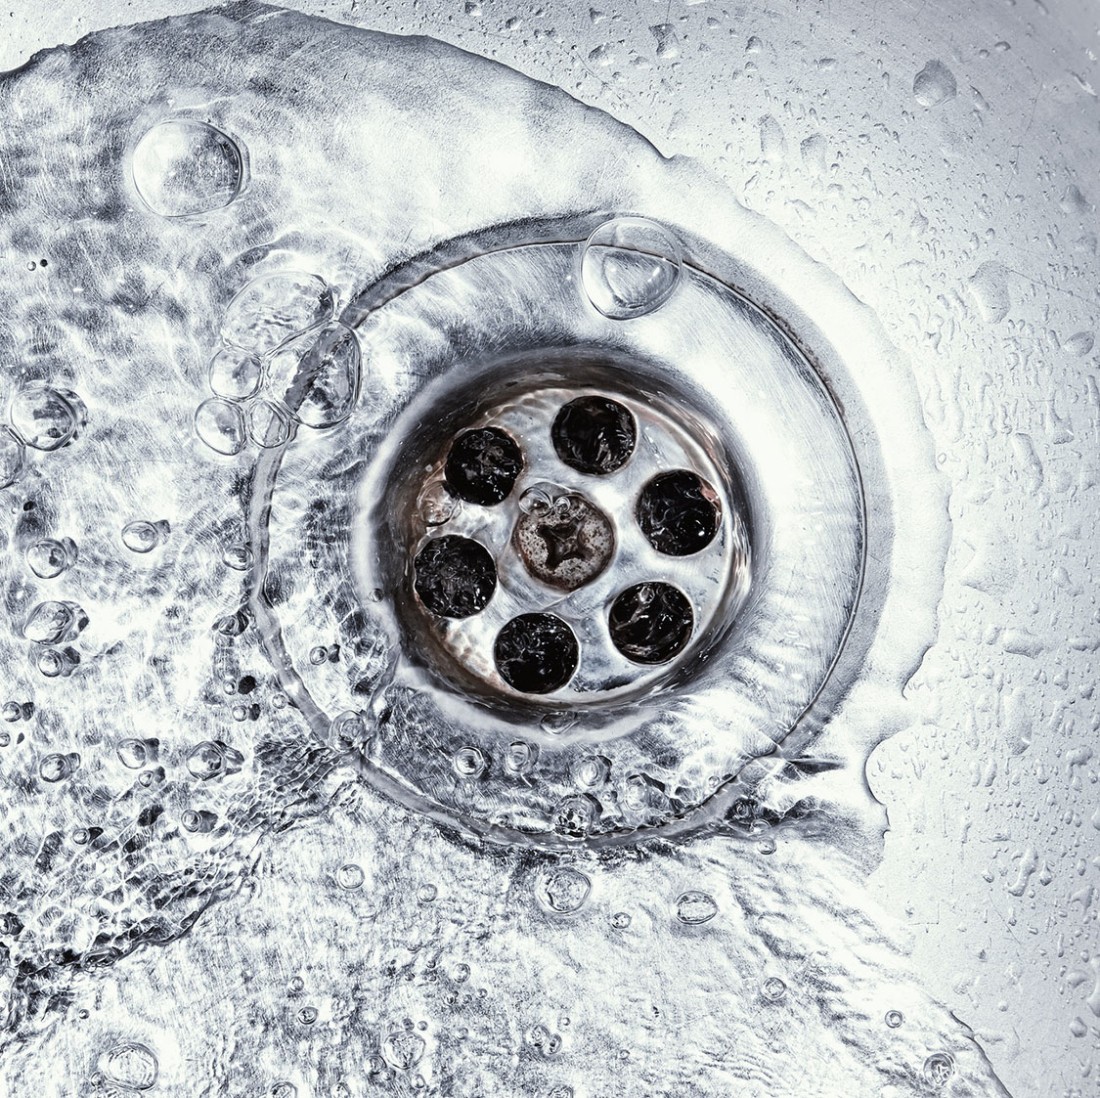 commercial drain cleaning services san jose ca